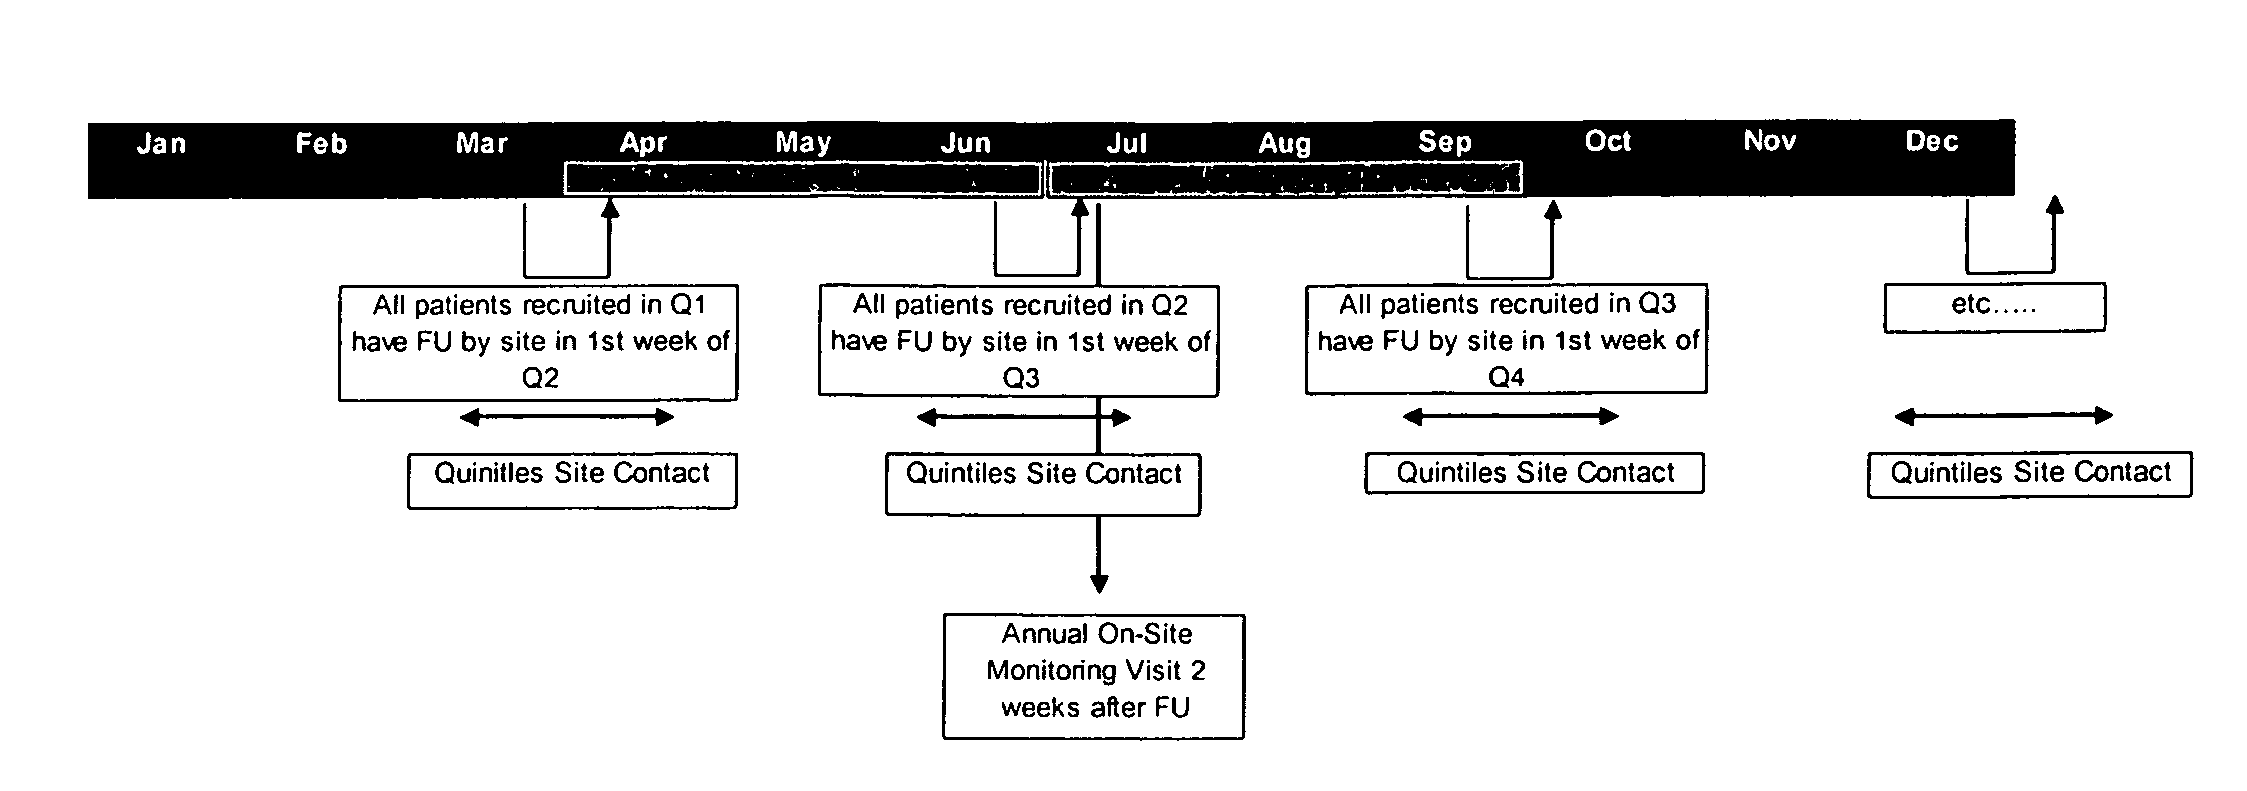 Systems and methods for scheduling and sequencing sessions or appointments